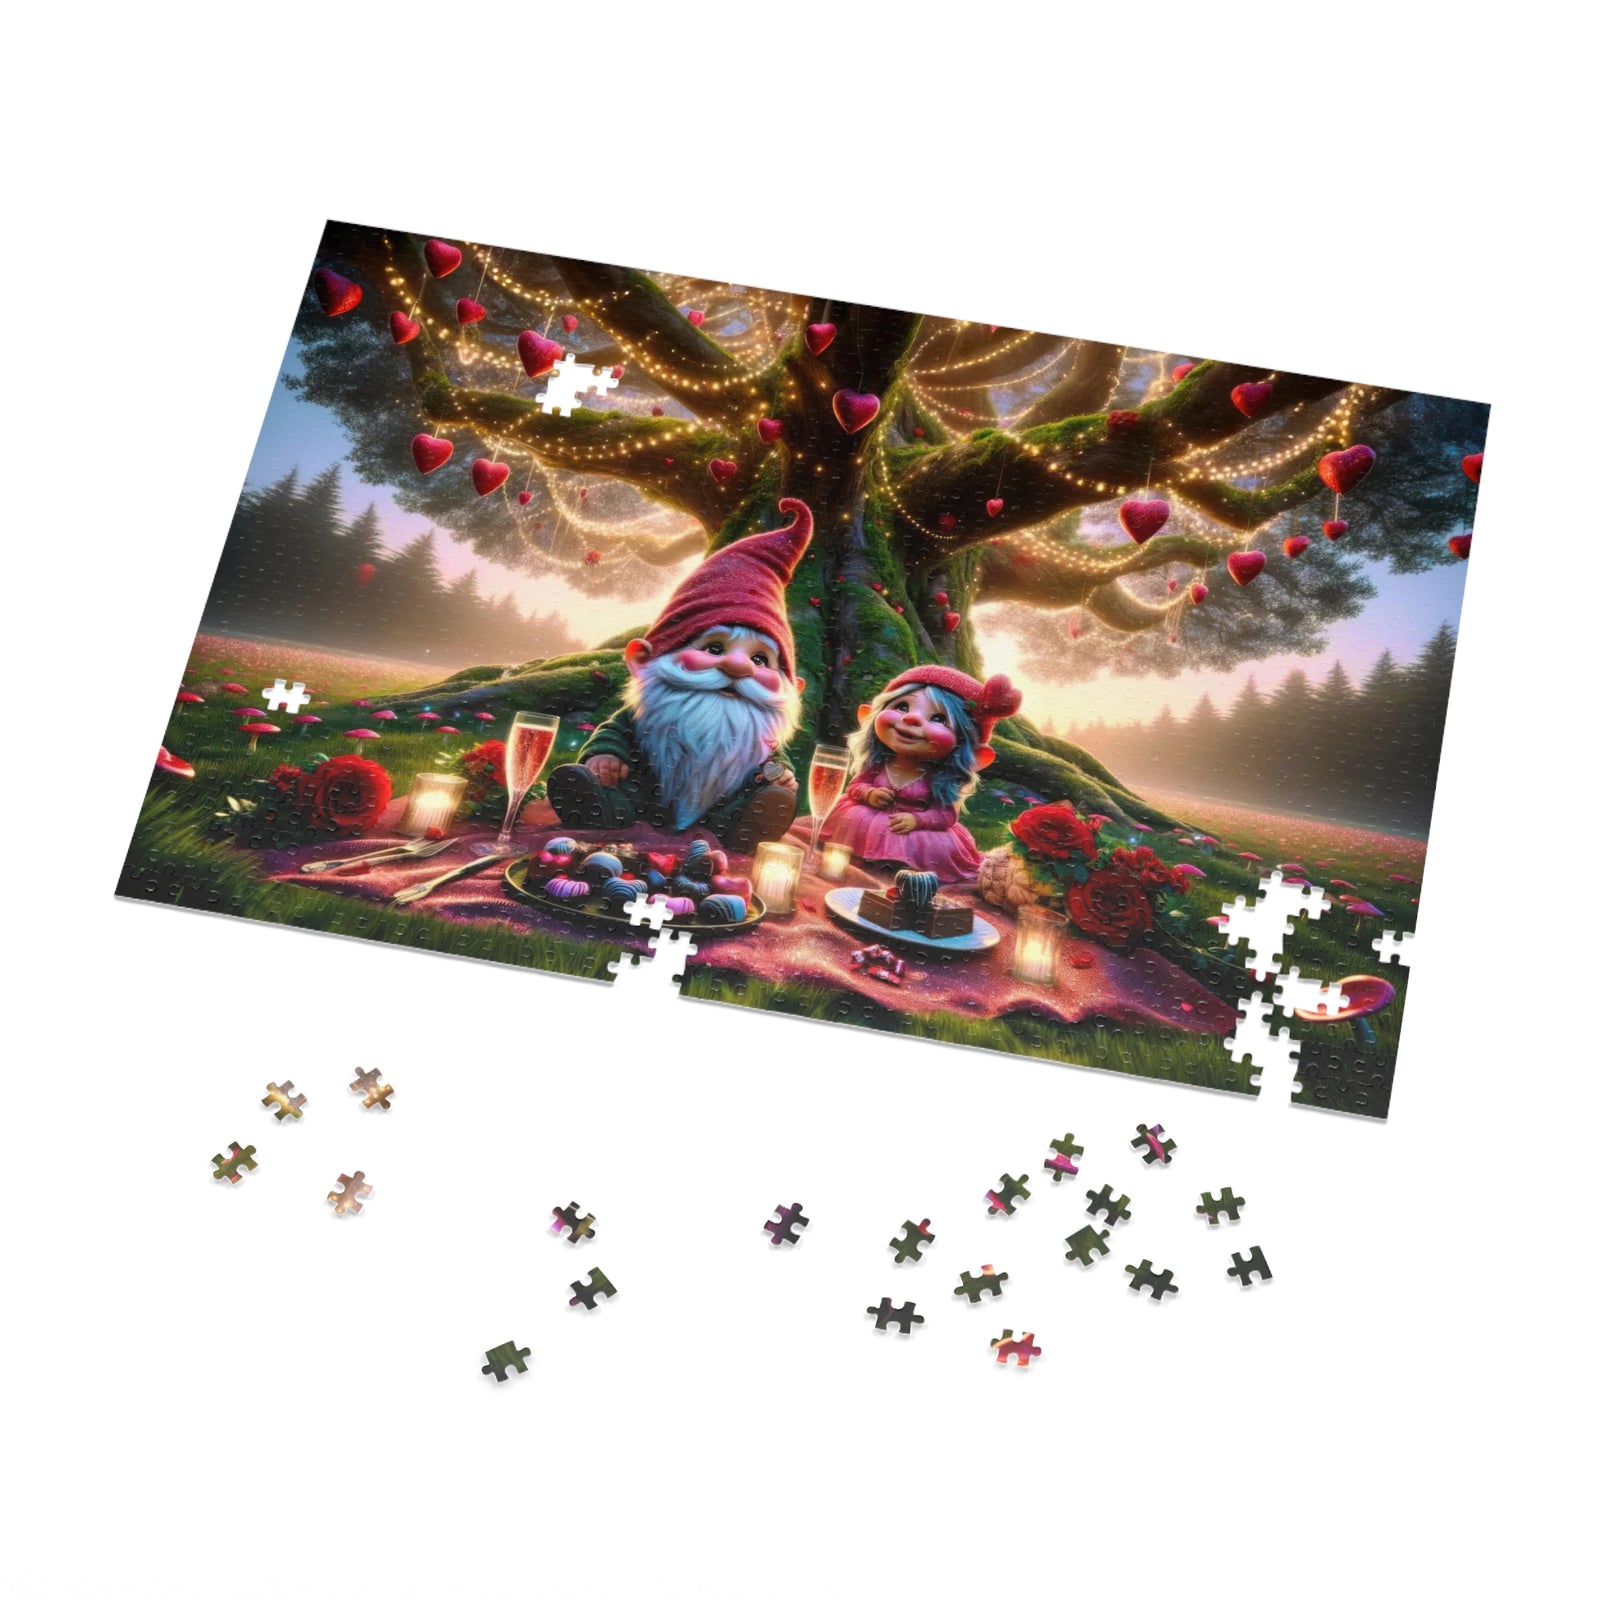 Enchanted Valentine's Eve in the Whimsical Woodlands Jigsaw Puzzle